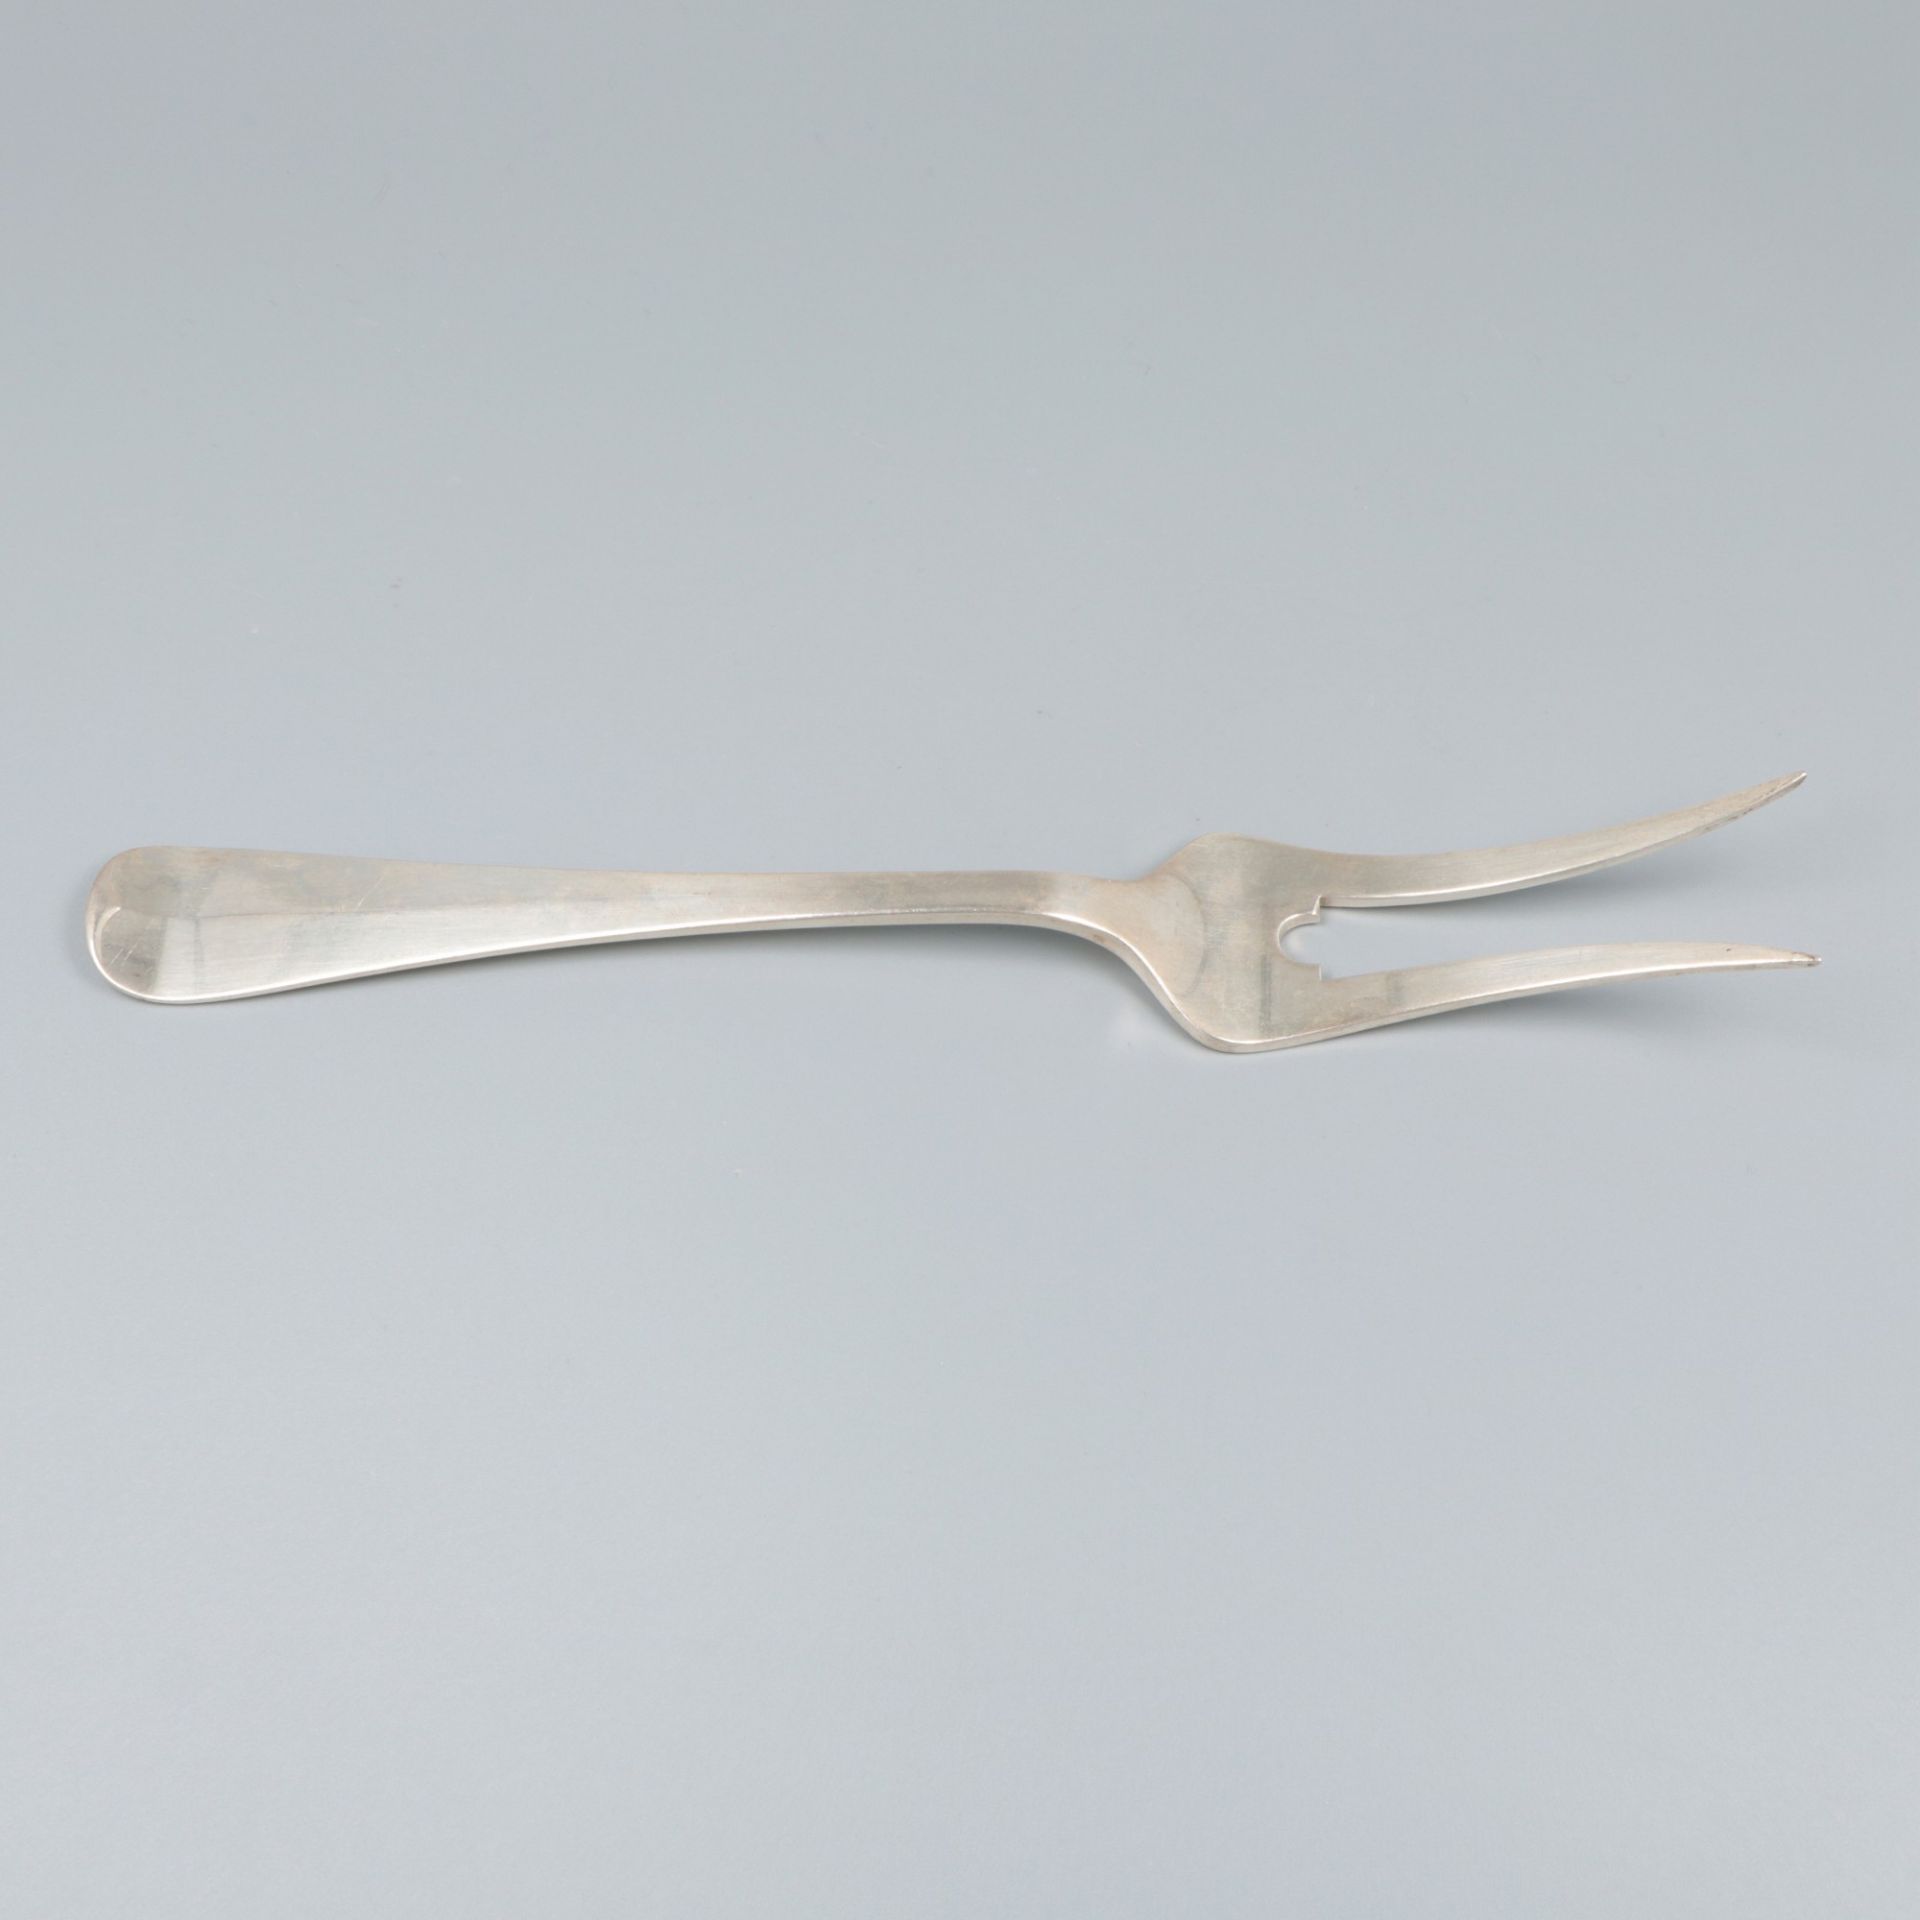 Meat serving fork "Haags Lofje" silver. - Image 3 of 6